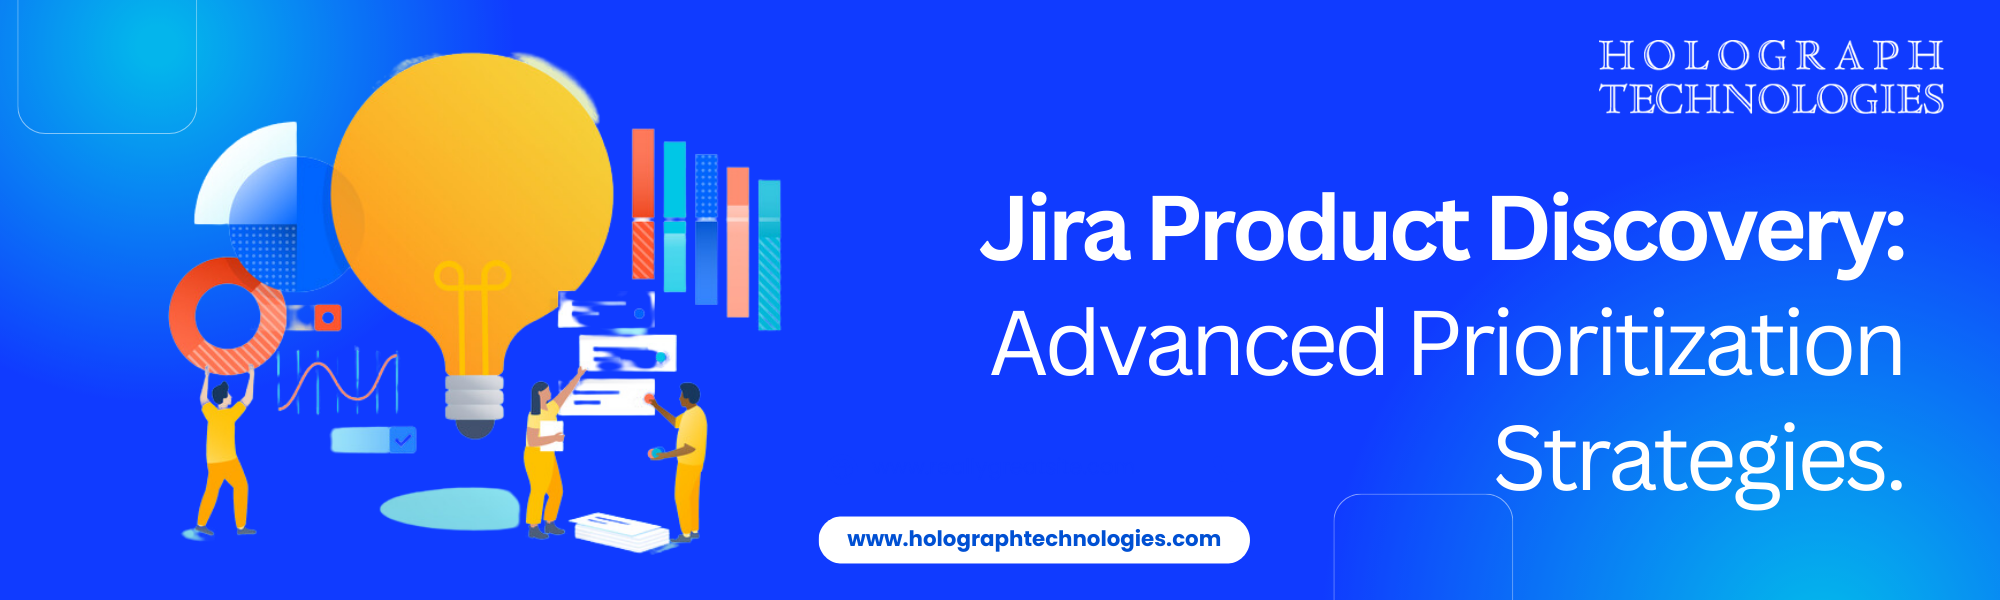 Illustration showing advanced prioritization strategies in Jira Product Discovery